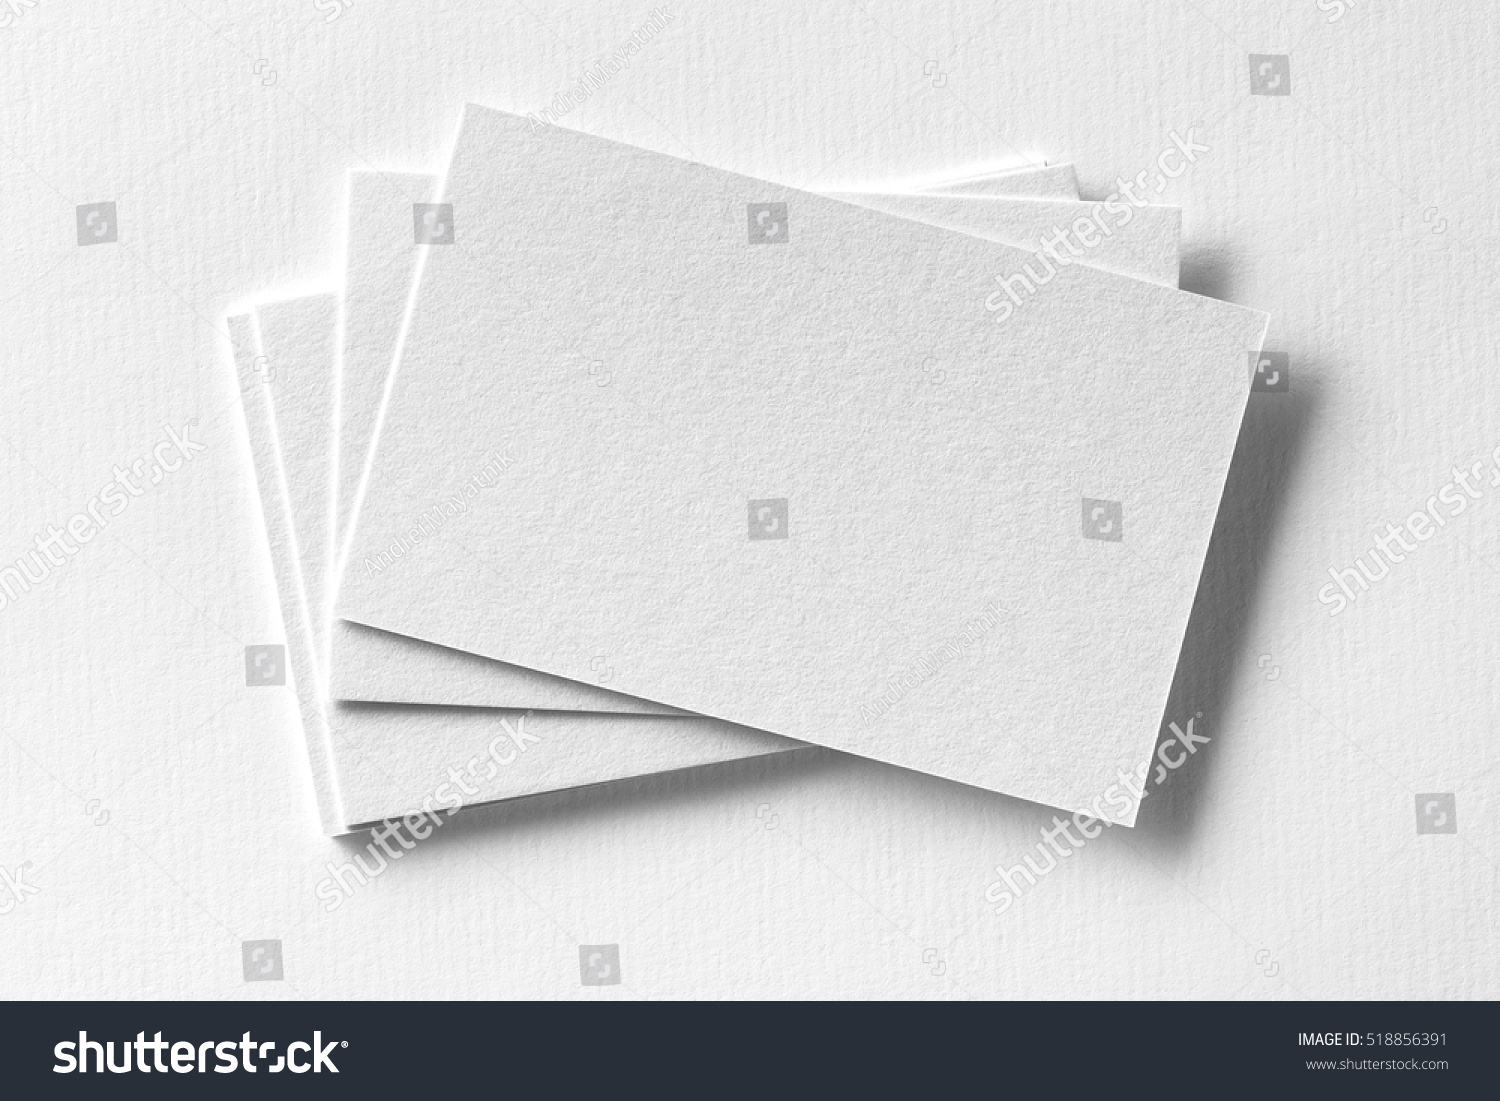 Mockup of business cards fan stack at white textured paper background. #518856391